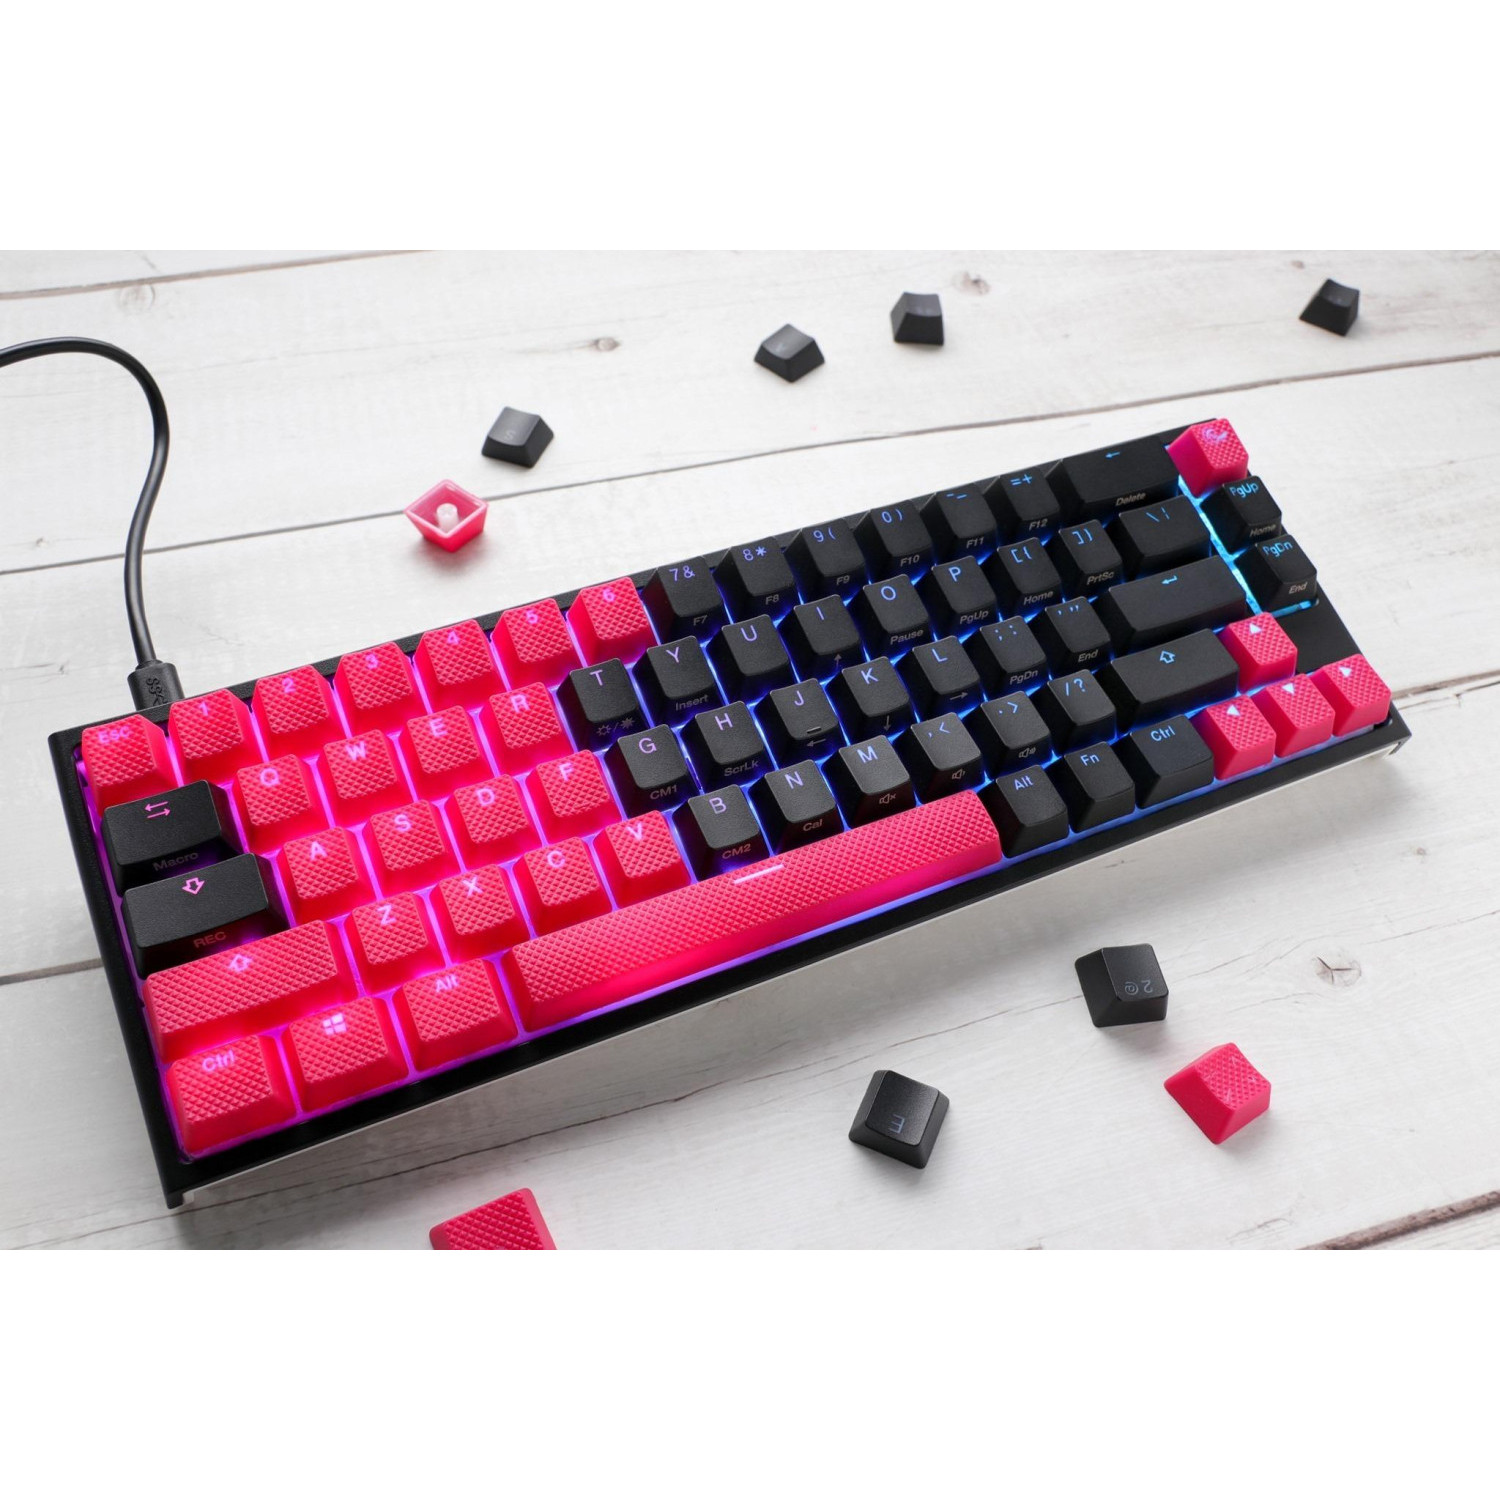 Капачки за механична клавиатура Ducky Red 31-Keycap Set Rubber Backlit Double-Shot US Layout